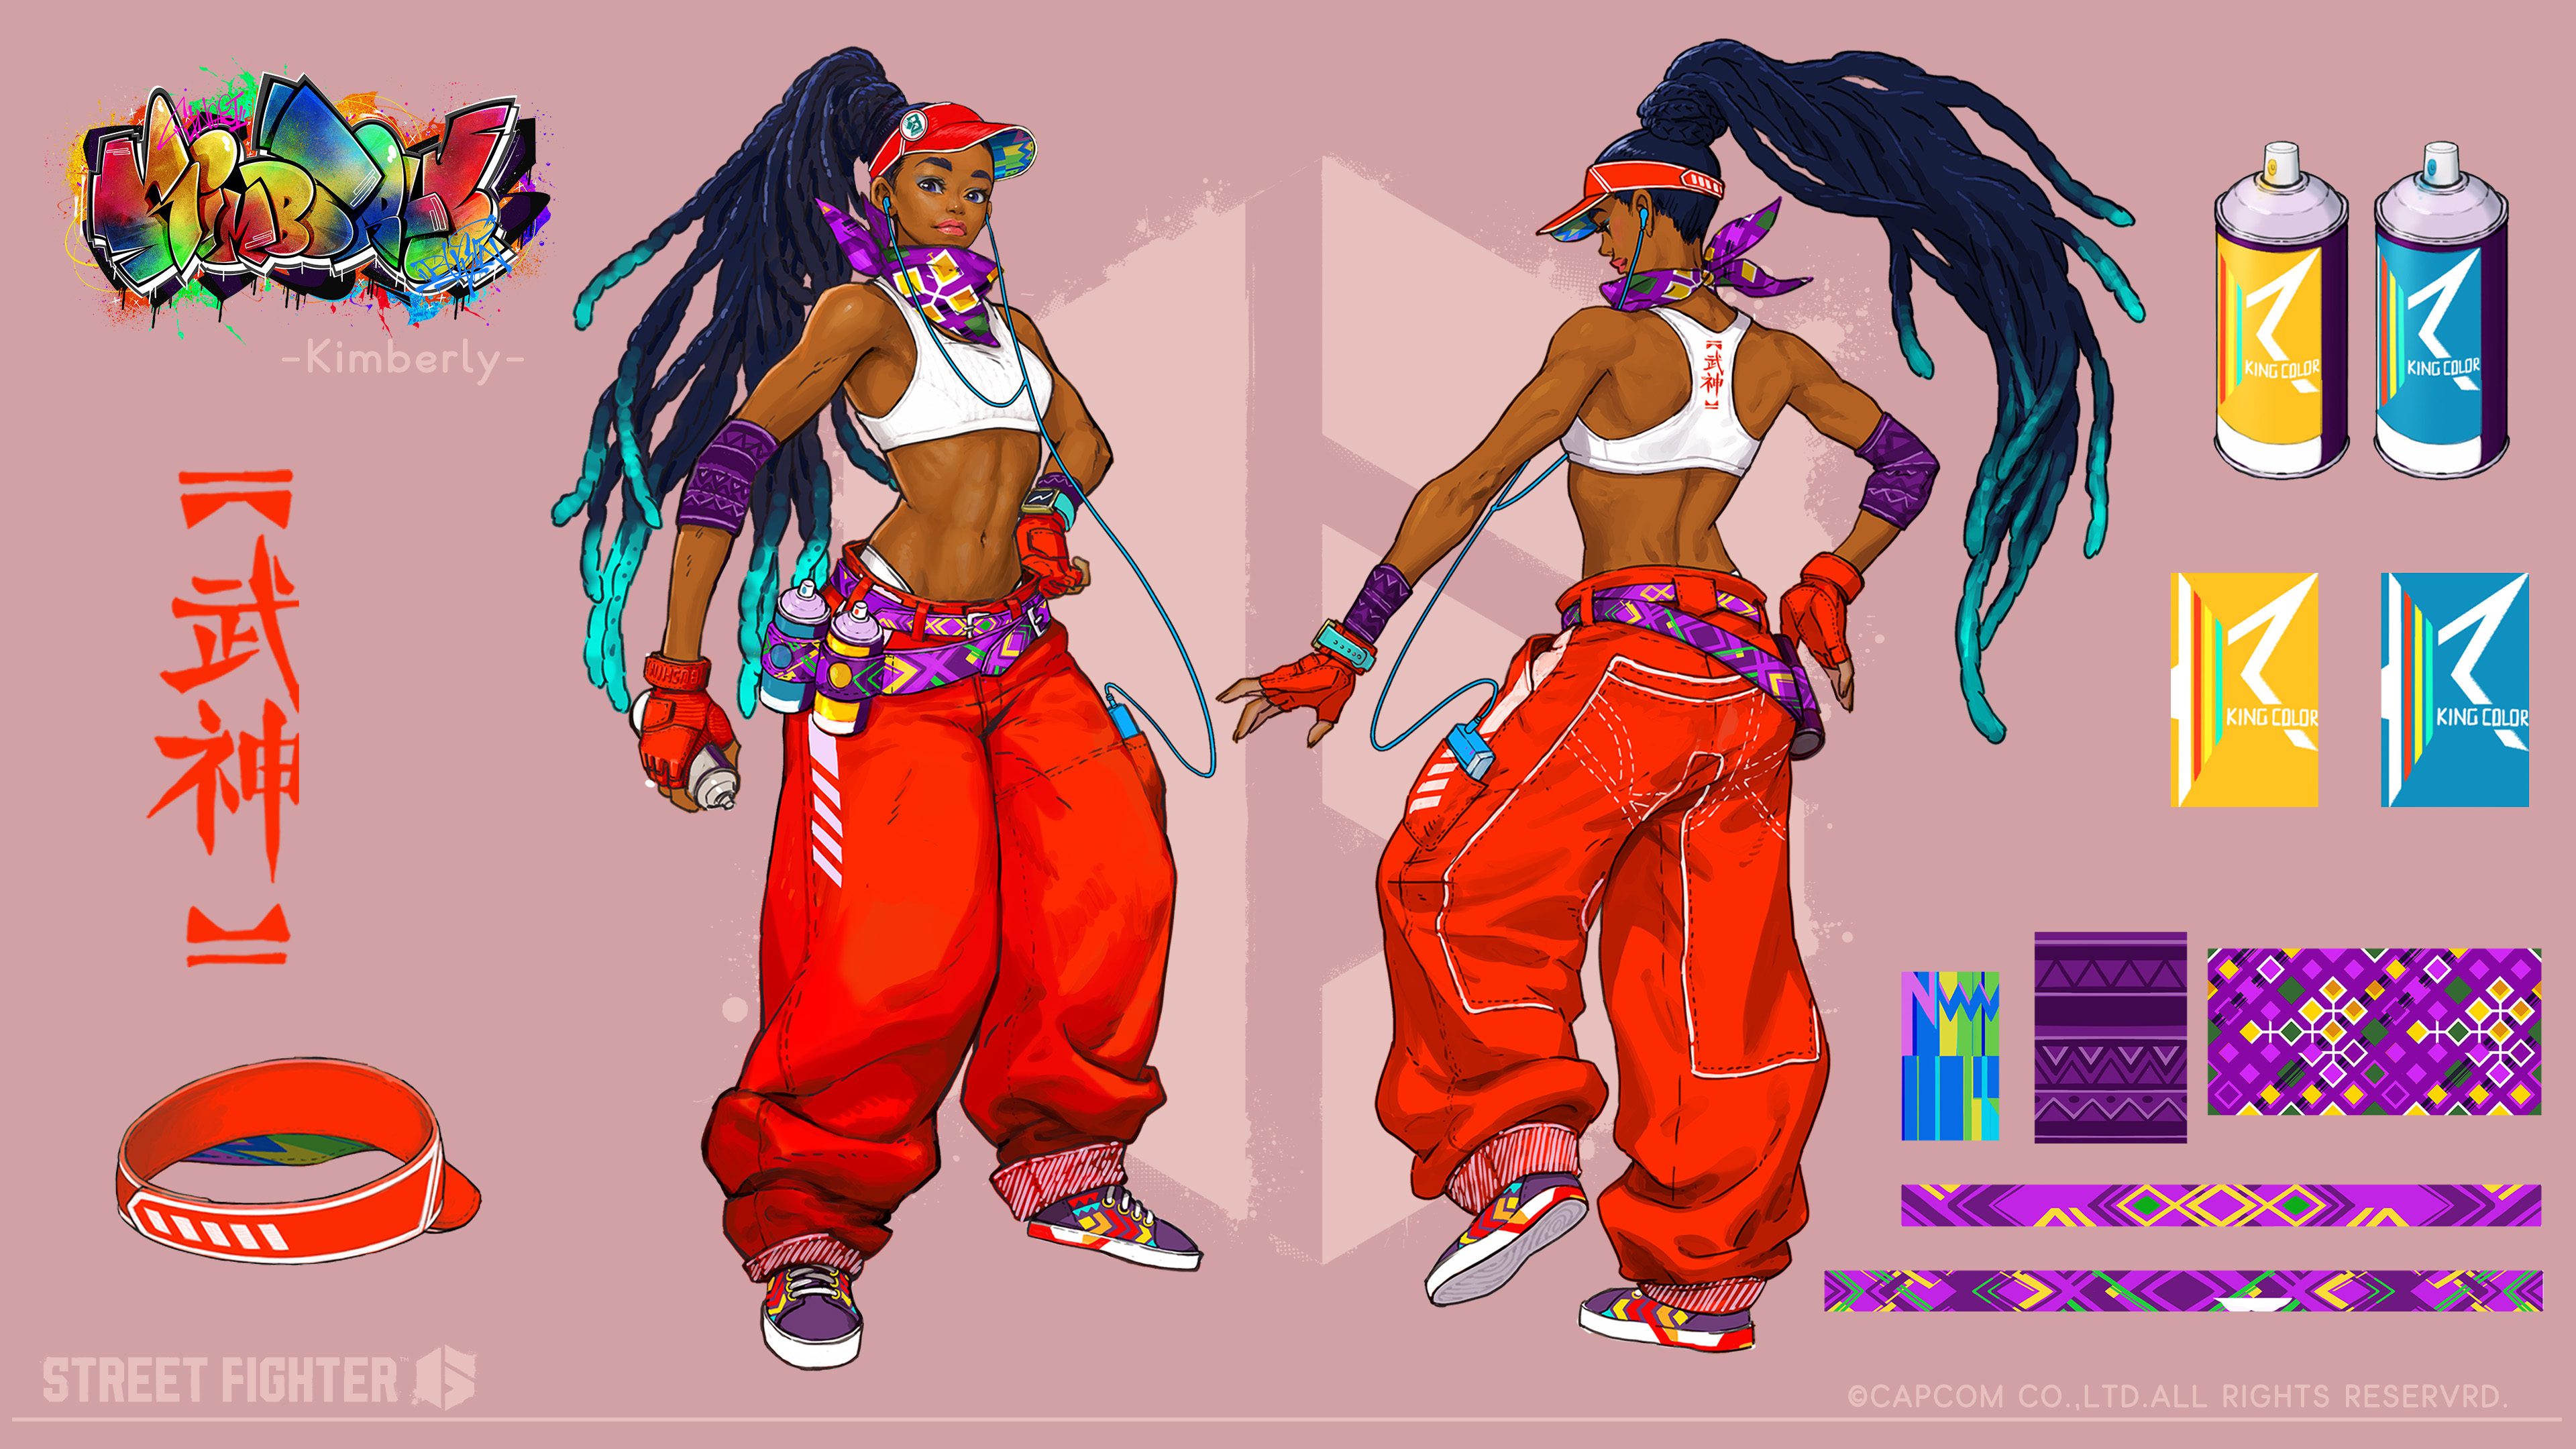 Image result for street fighter character designs  Street fighter  characters, Street fighter art, Street fighter